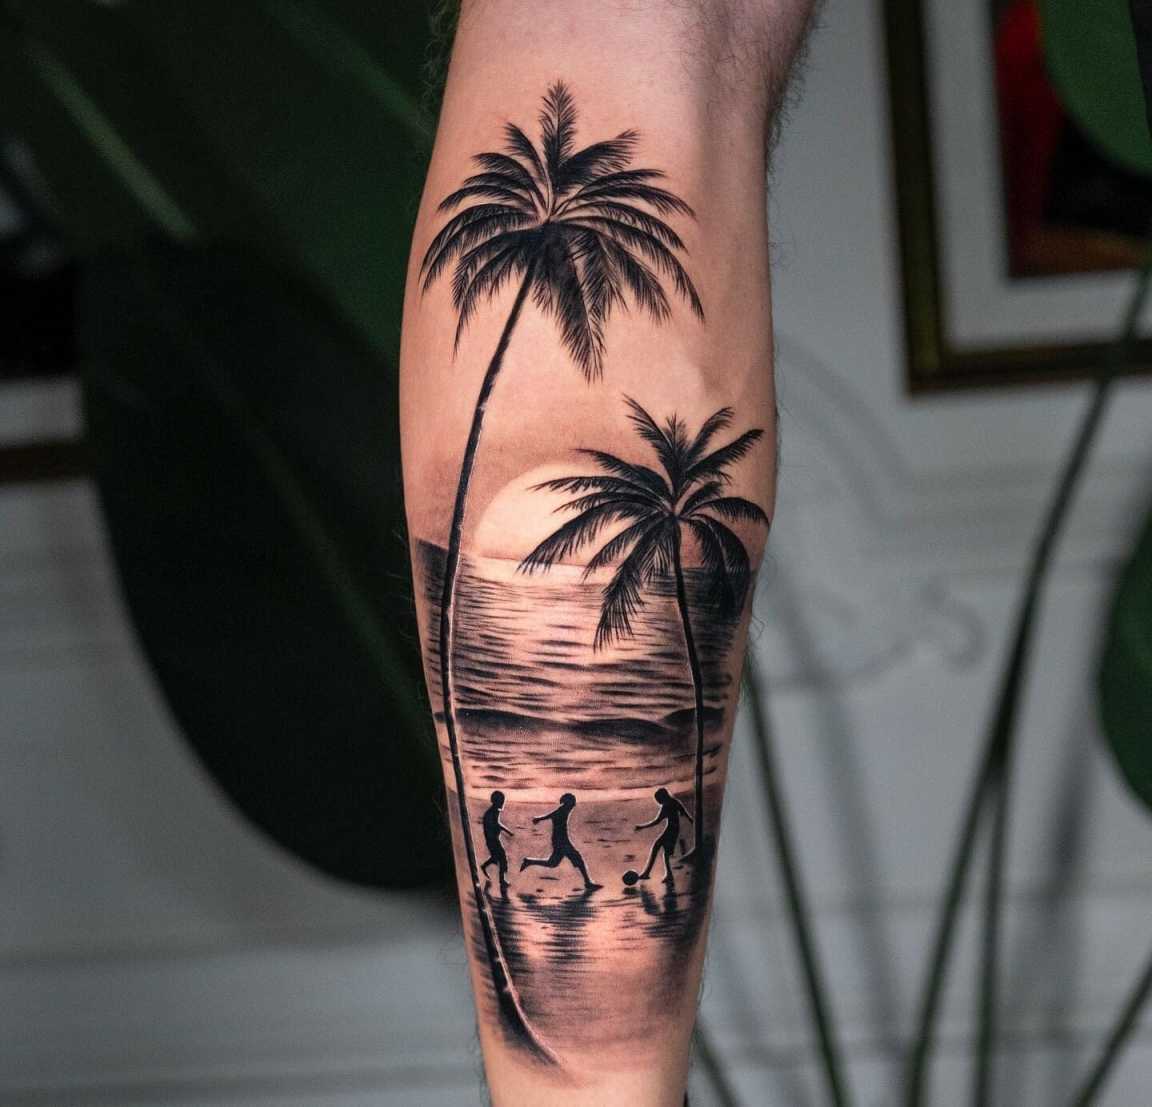 Beachy Tattoos Ideas: Capture the Sun and Sea in Beautiful Ink